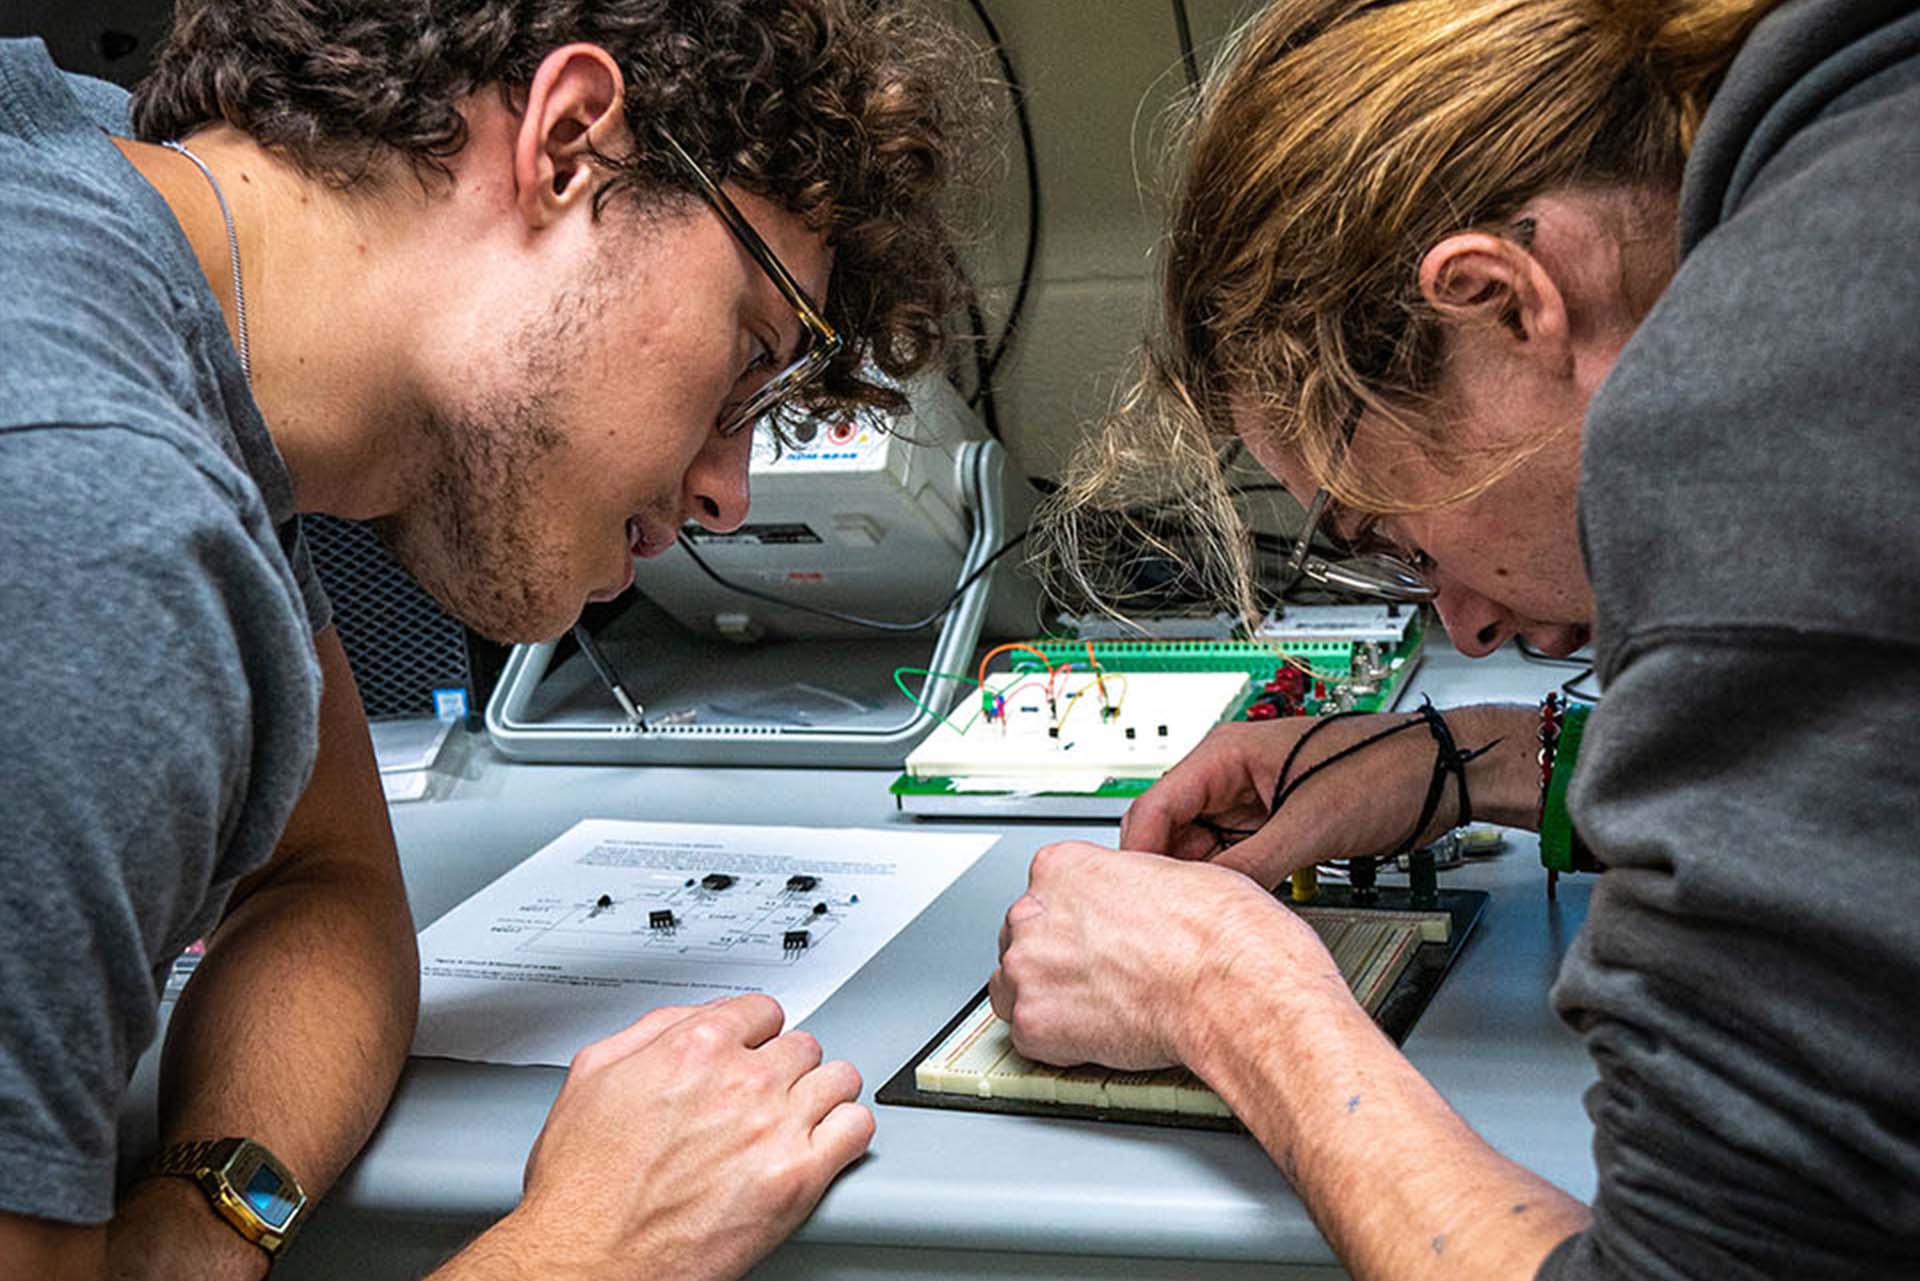 Students working in the Advanced Circuits Lab